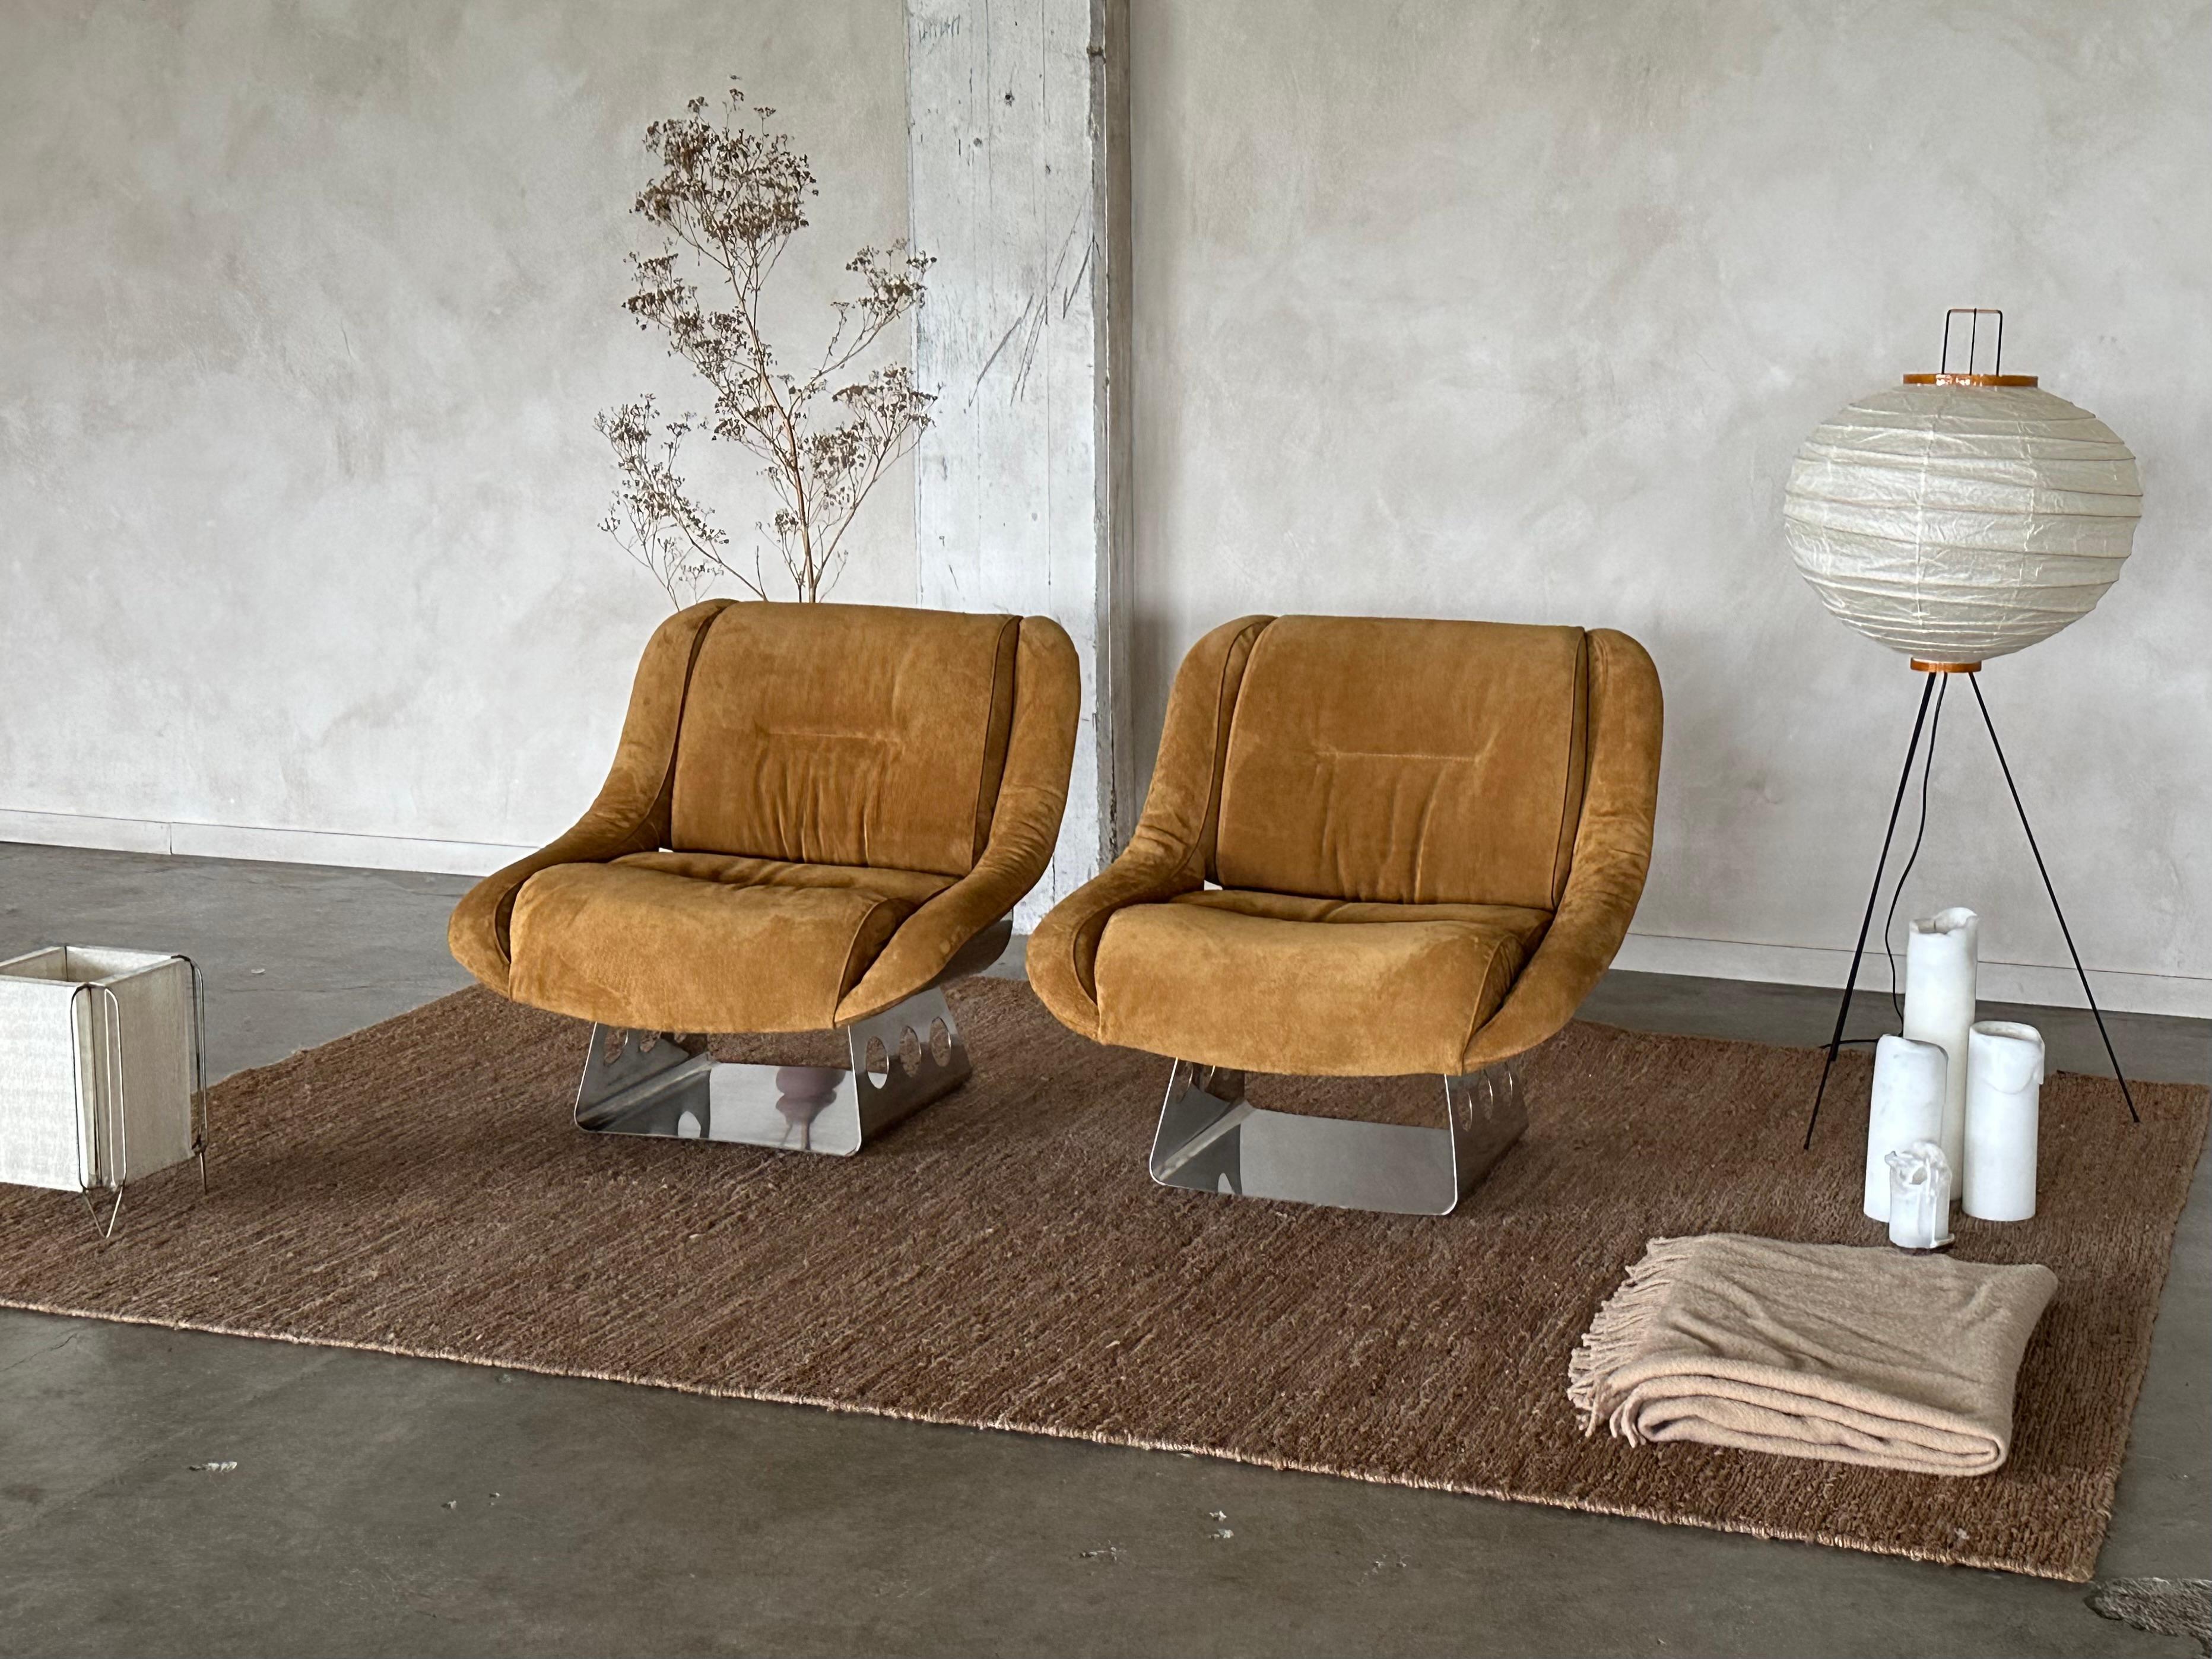 Rare Suede and Stainless Steel Lounge Chairs by Rima Padova, 1974 For Sale 10